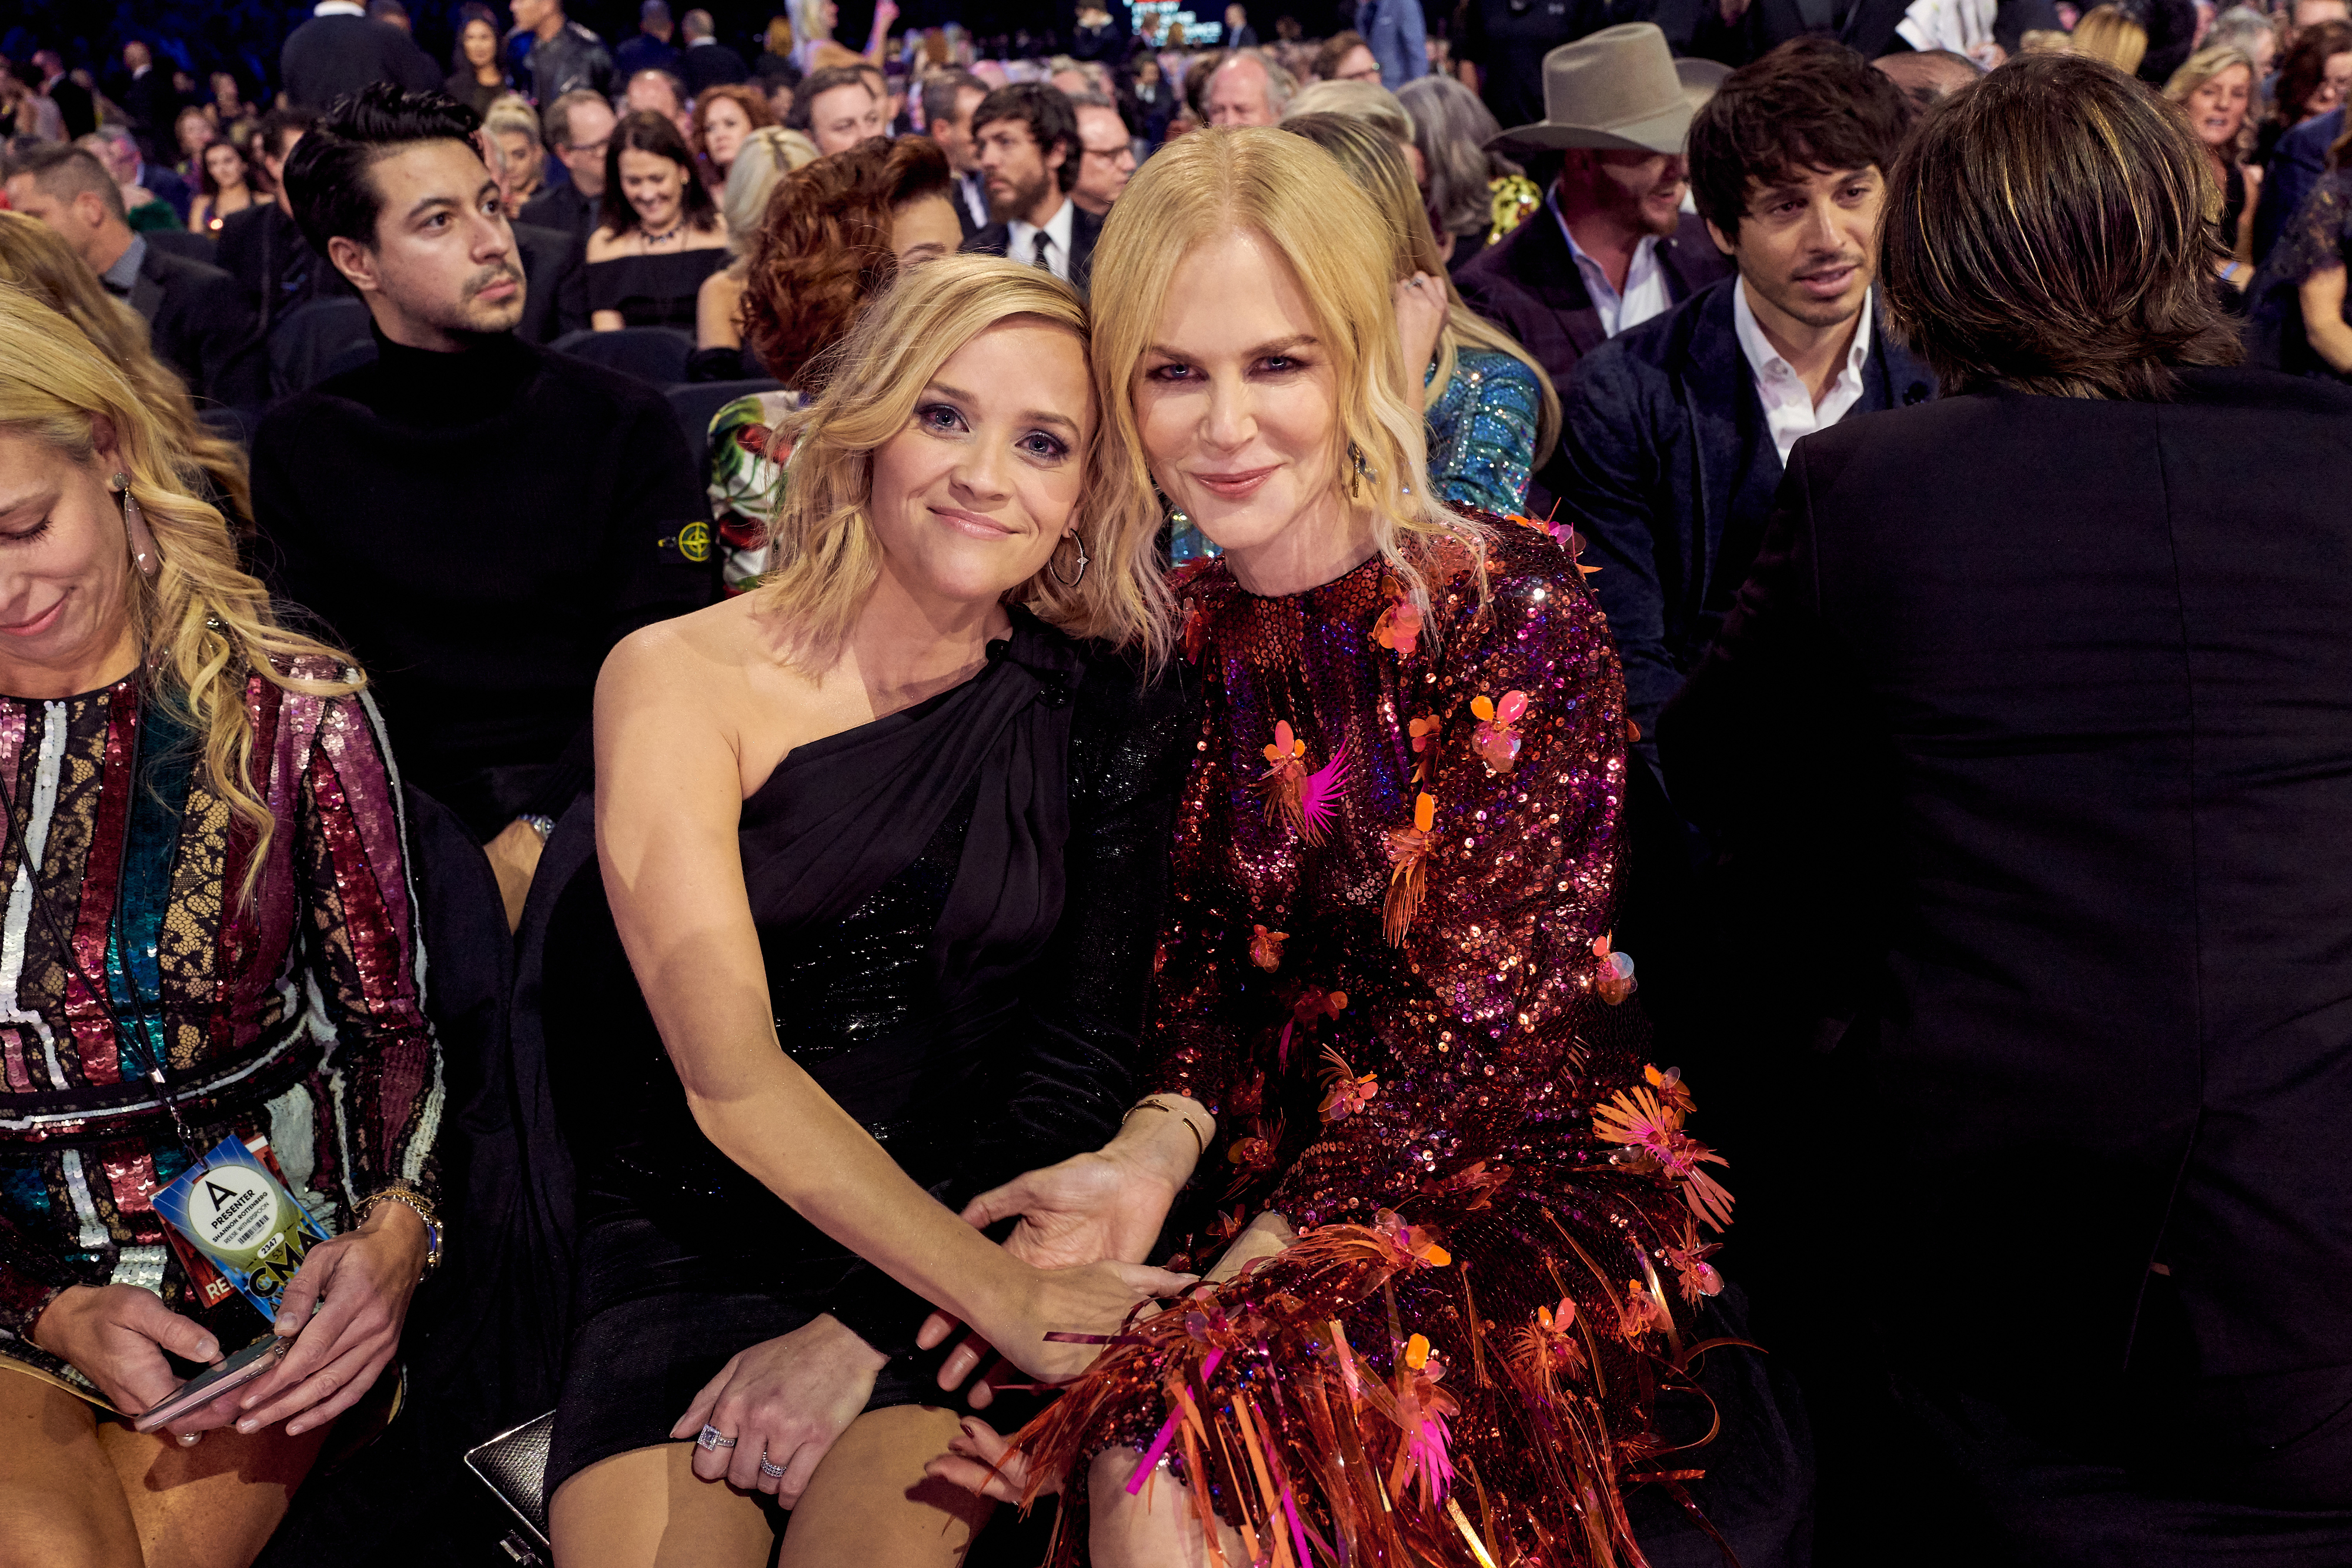 Close-up of Nicole and Reese sitting together and leaning in toward each other